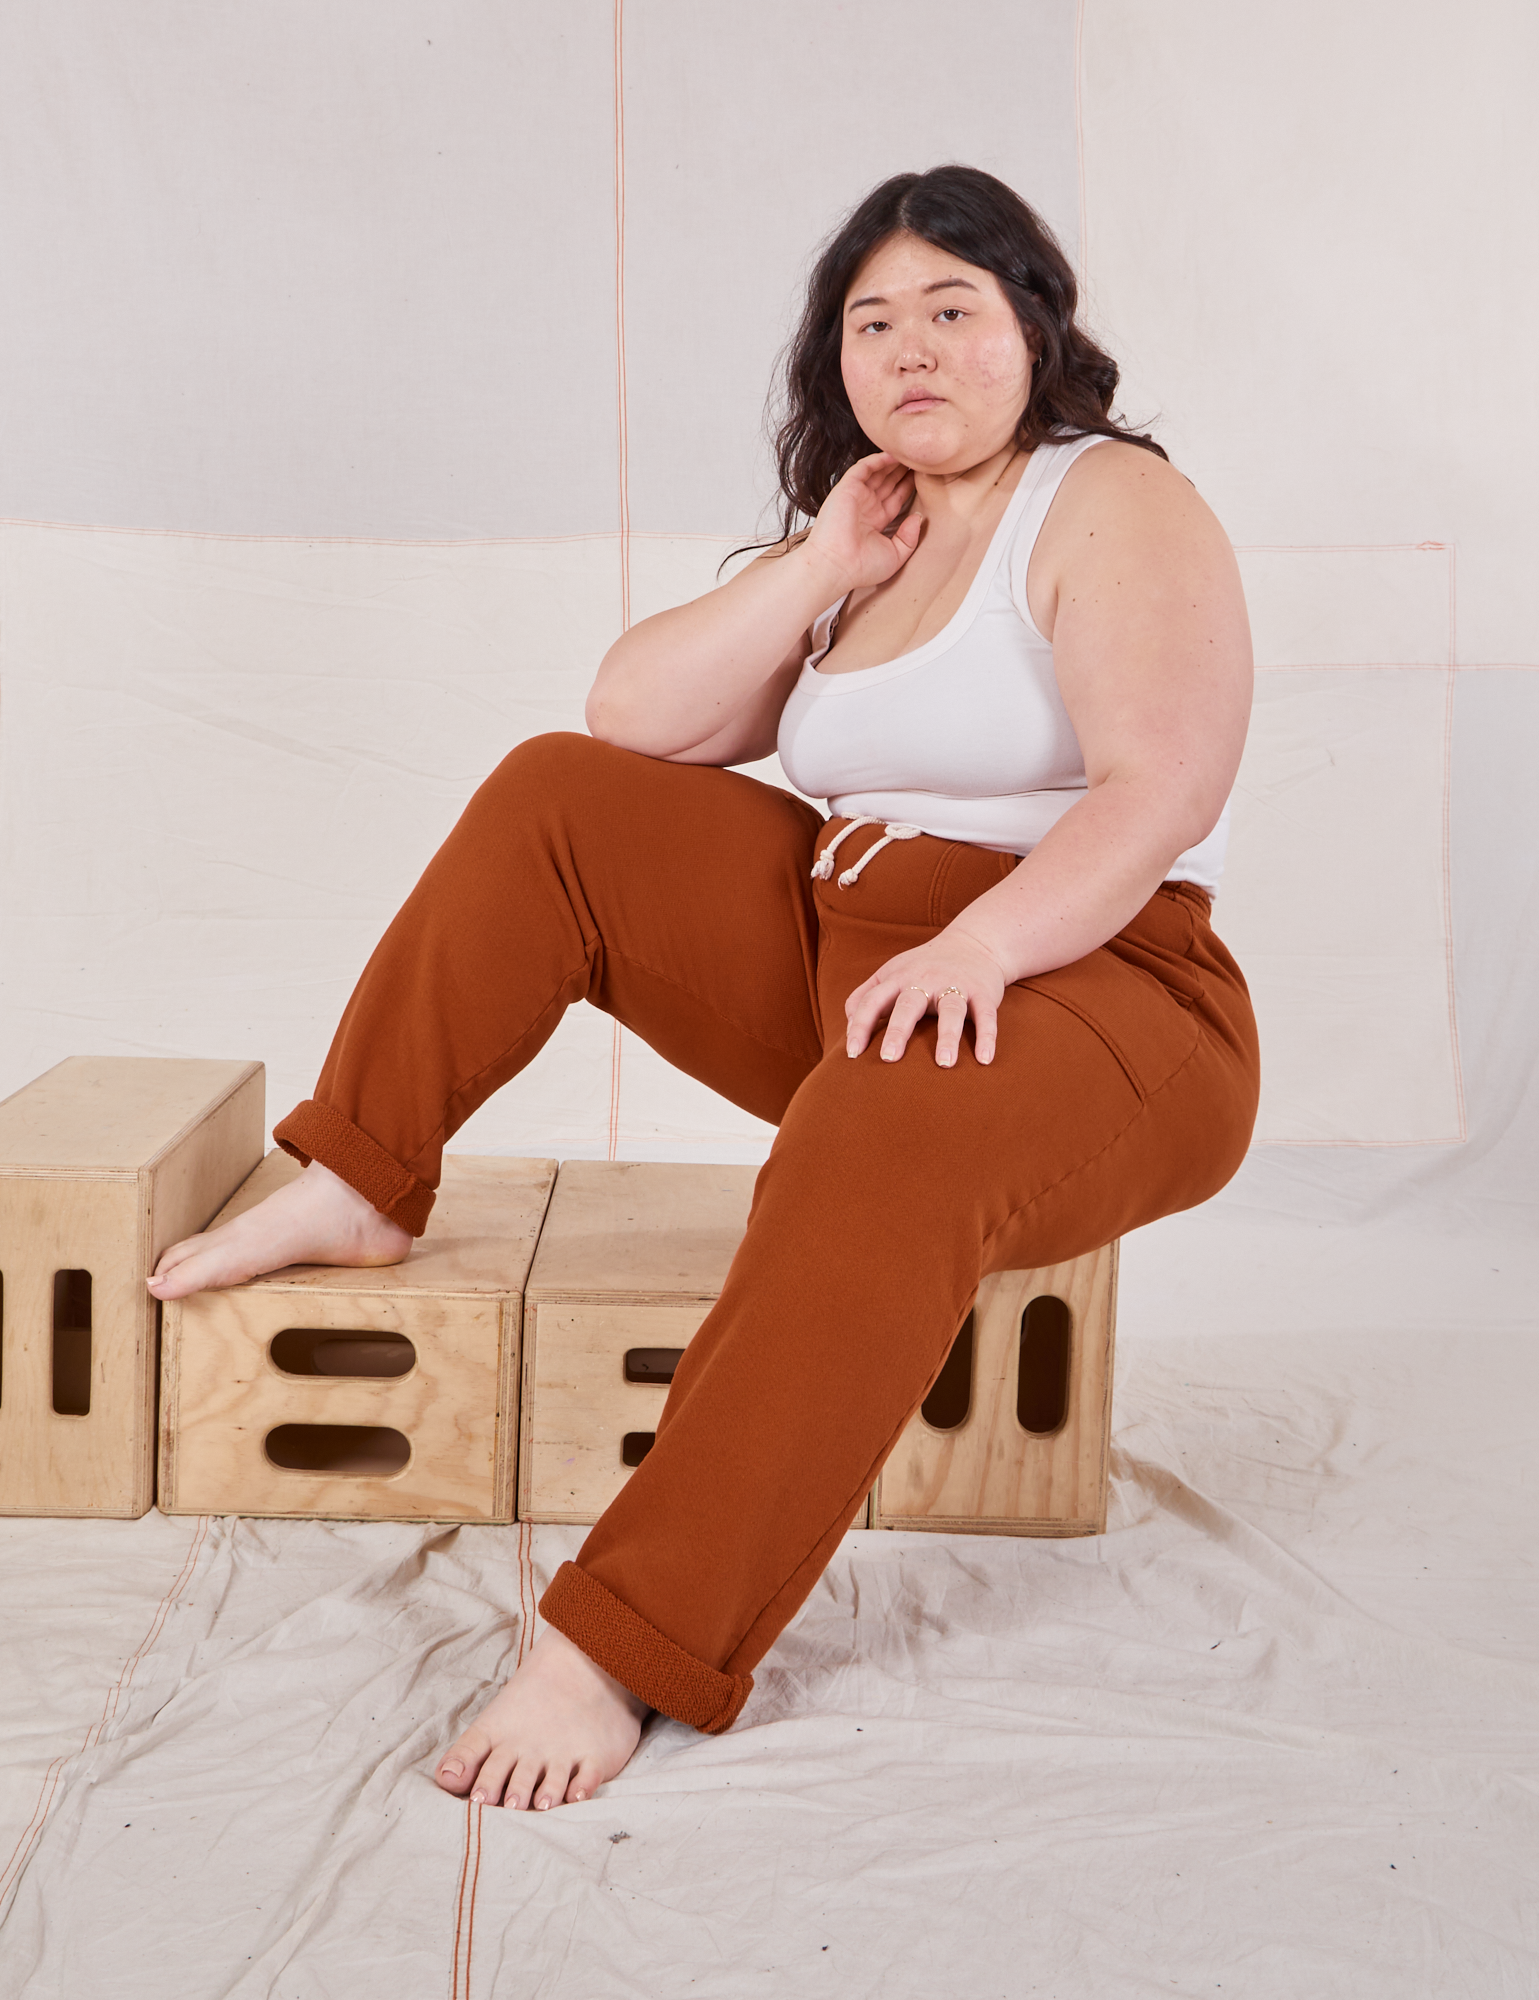 Ashley is wearing Rolled Cuff Sweat Pants in Burnt Terracotta and Cropped Tank in vintage tee off-white